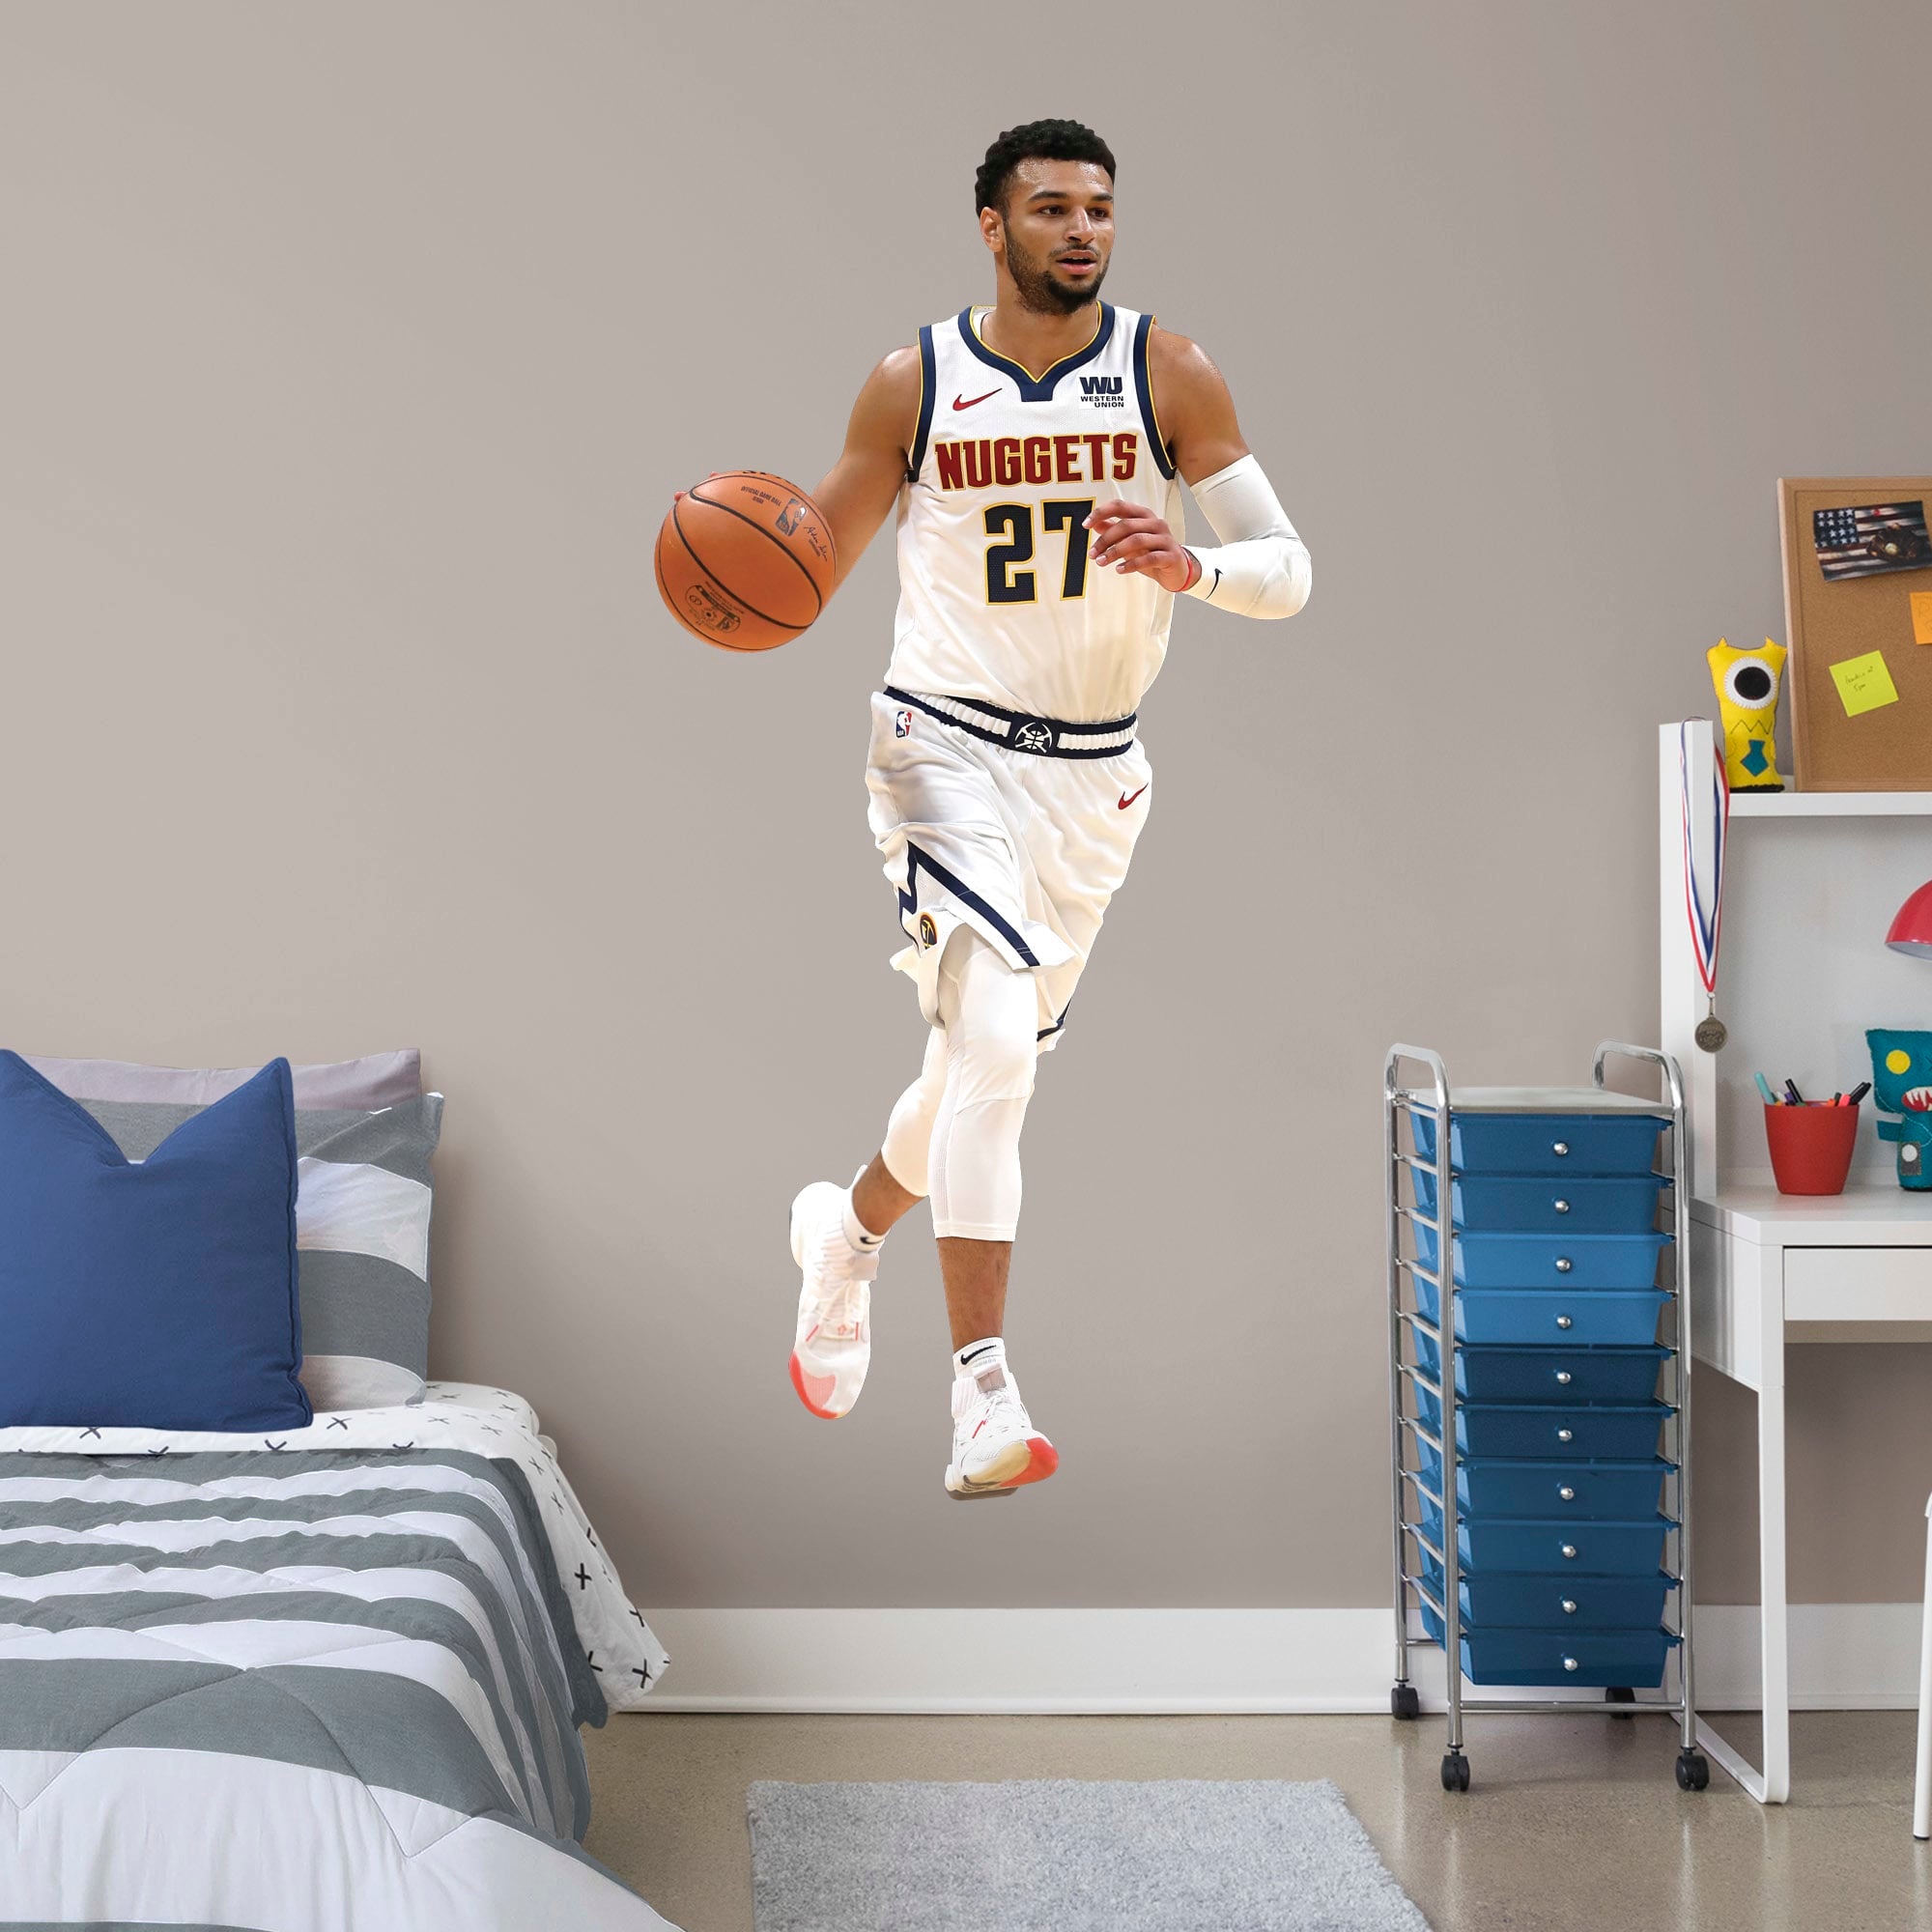 Jamal Murray for Denver Nuggets - Officially Licensed NBA Removable Wall Decal Life-Size Athlete + 2 Decals (37"W x 78"H) by Fat